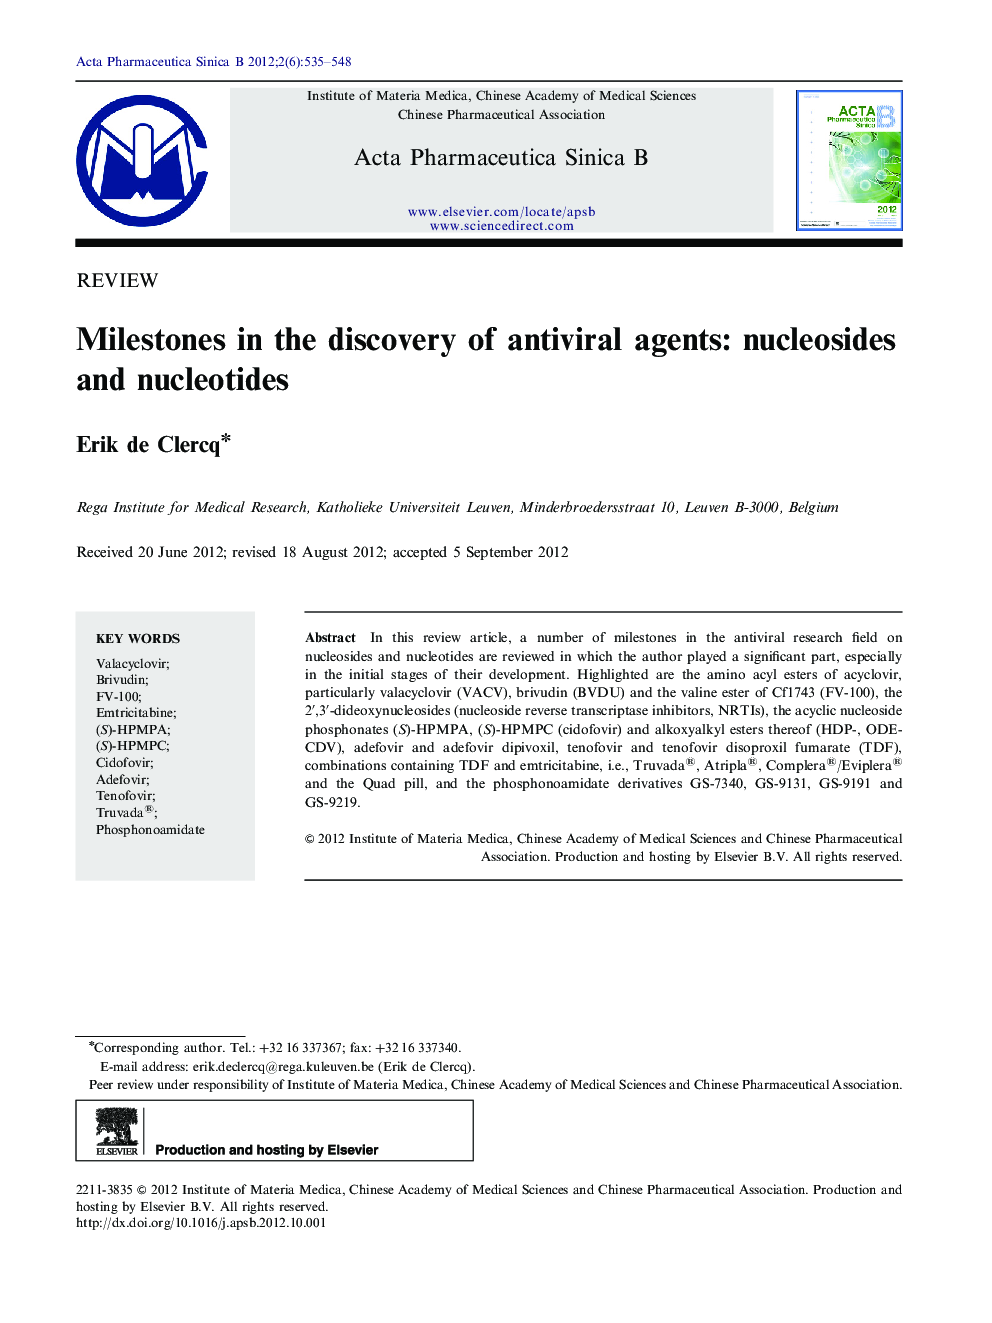 Milestones in the discovery of antiviral agents: nucleosides and nucleotides 